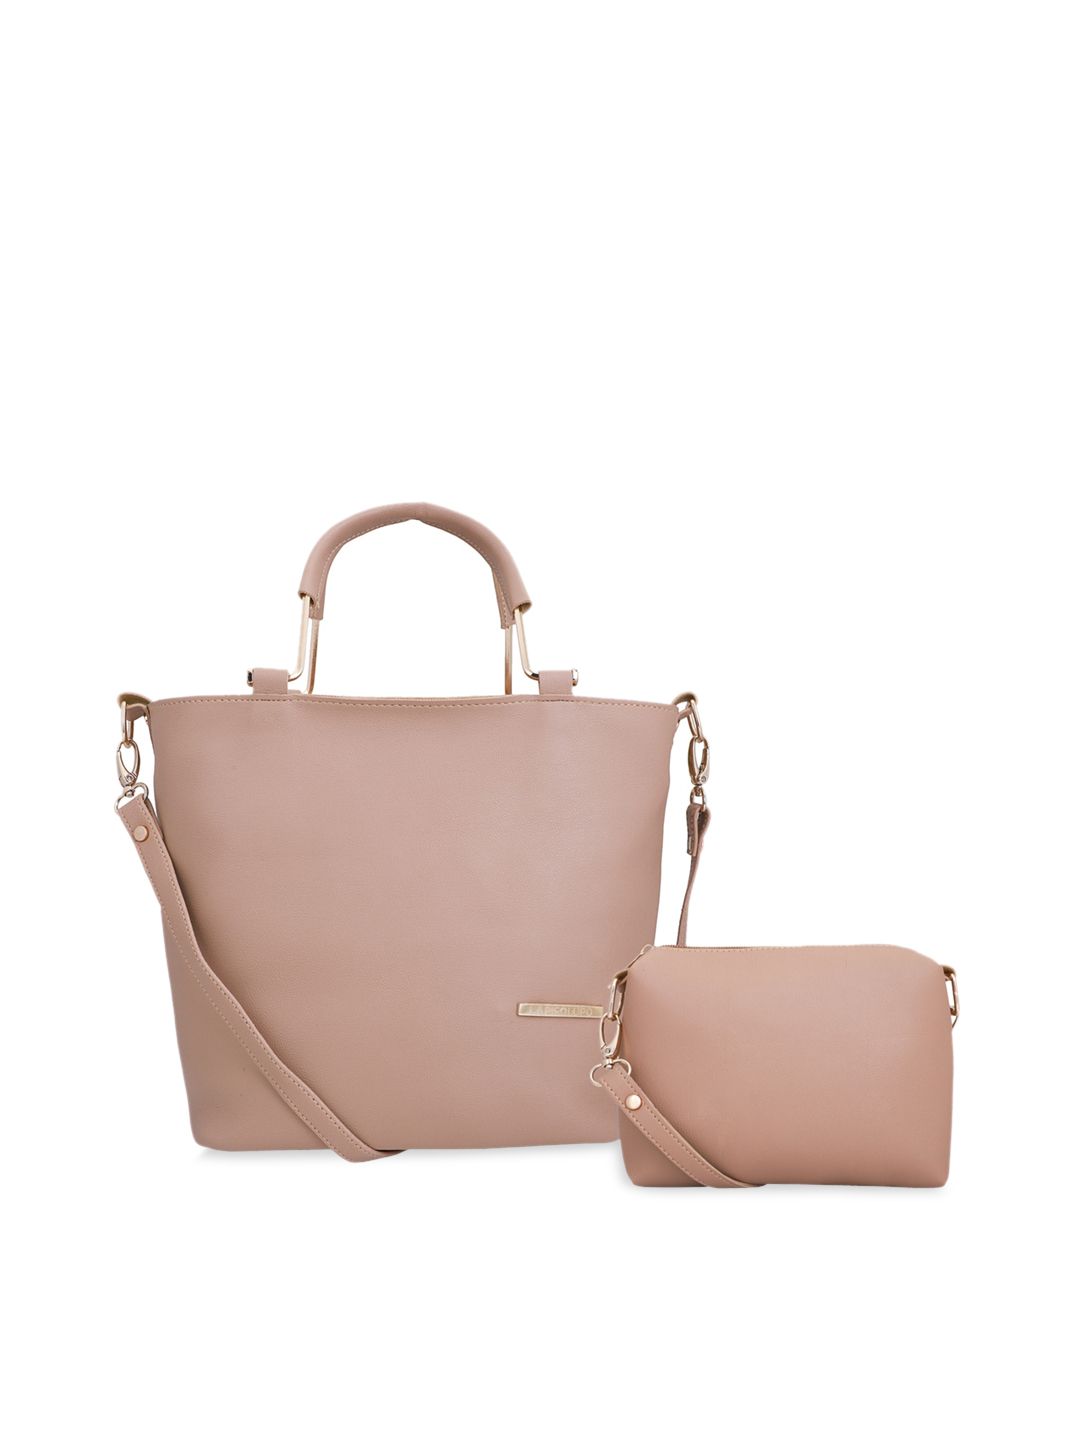 Lapis O Lupo Pink Textured Handbag with Pouch Price in India